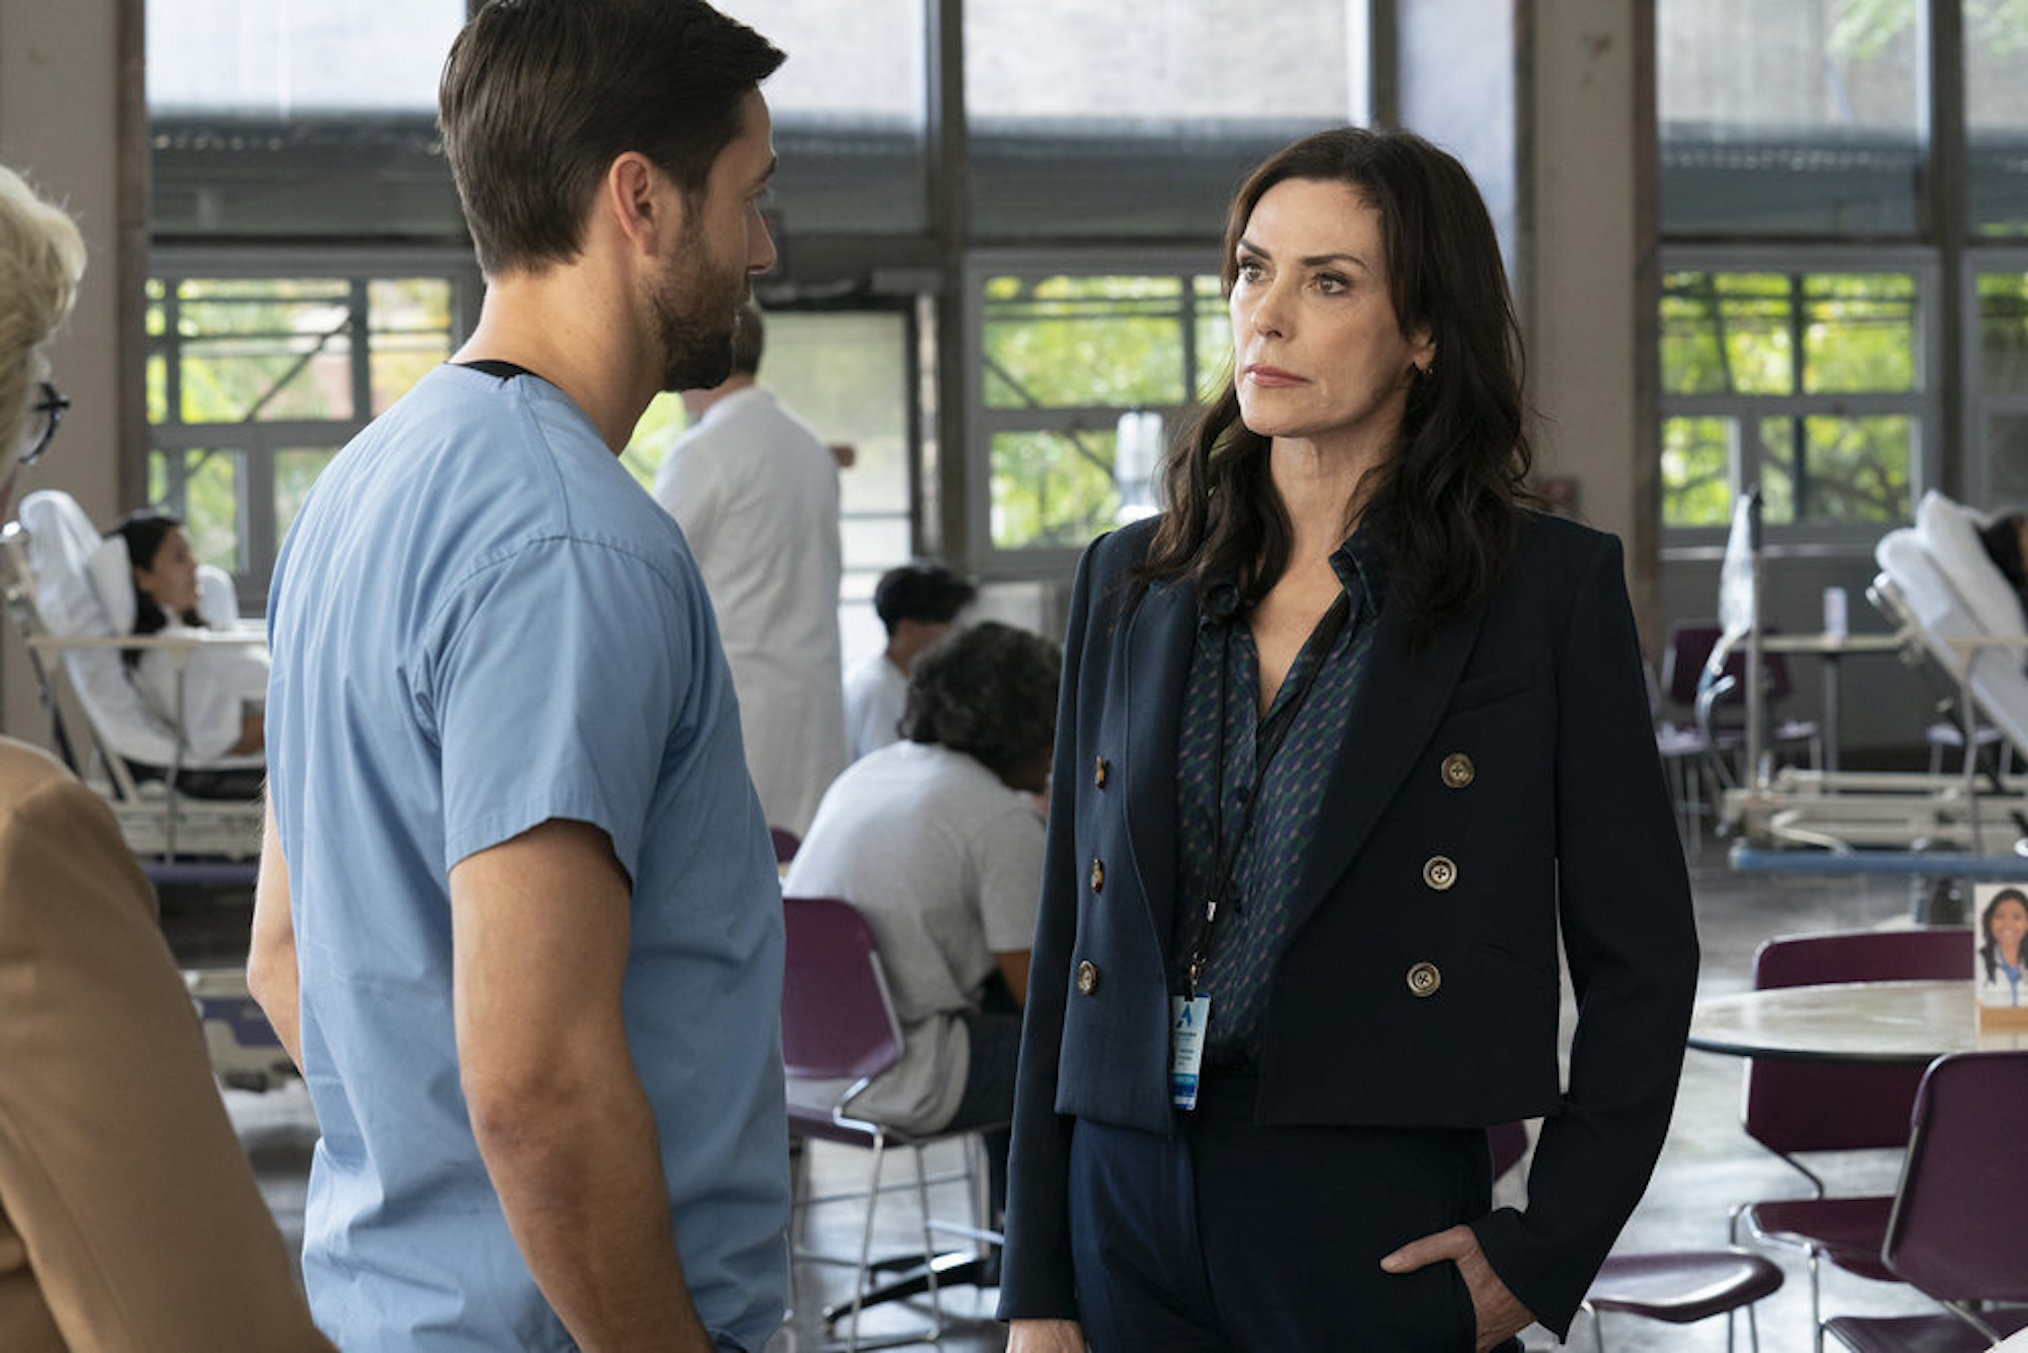 Ryan Eggold as Dr. Max Goodwin, Michelle Forbes as Dr. Veronica Fuentes in New Amsterdam